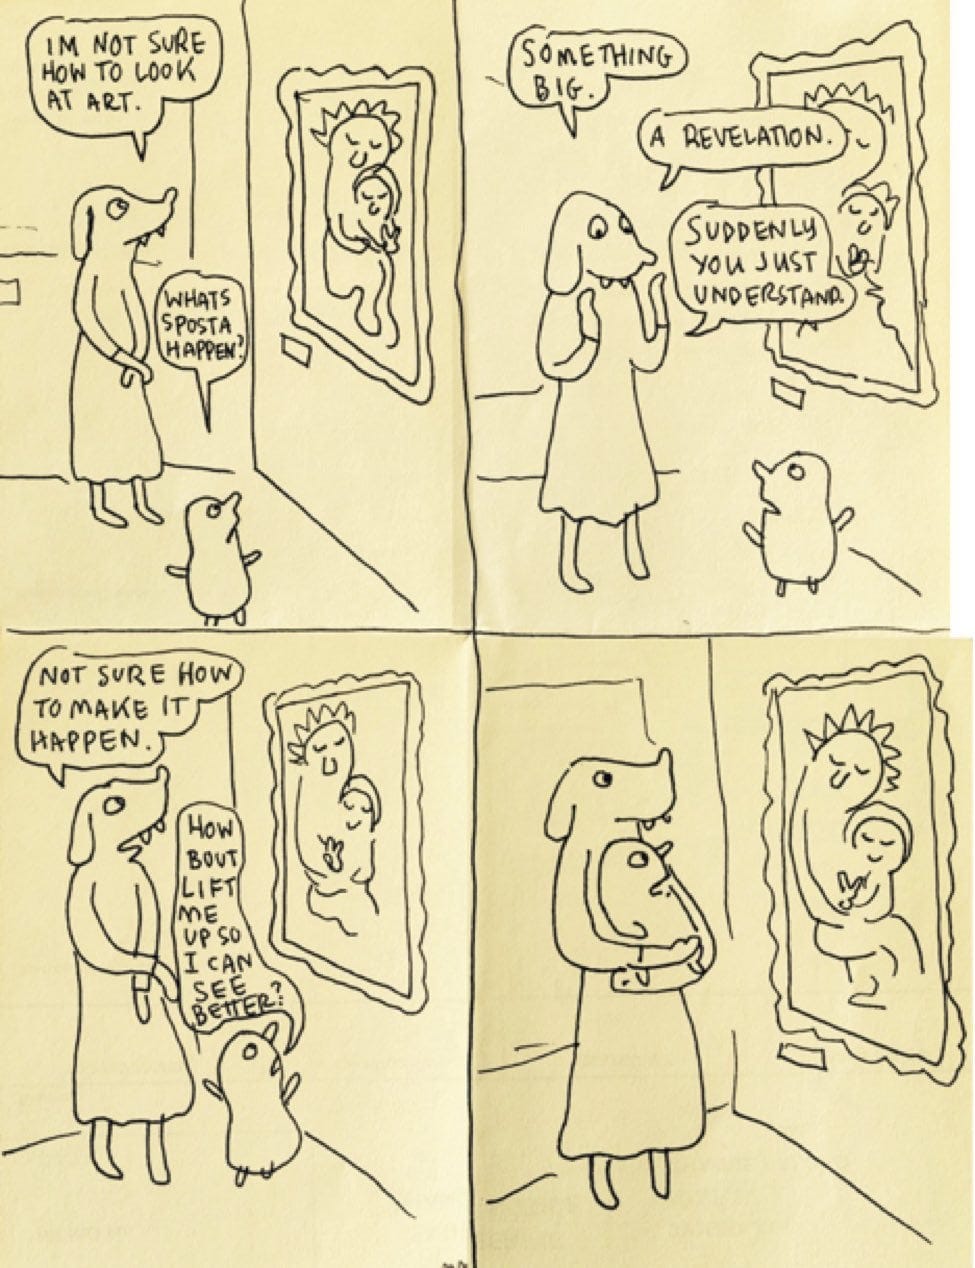 What's up with this "I'm not sure how to see art" comic? : r/OutOfTheLoop